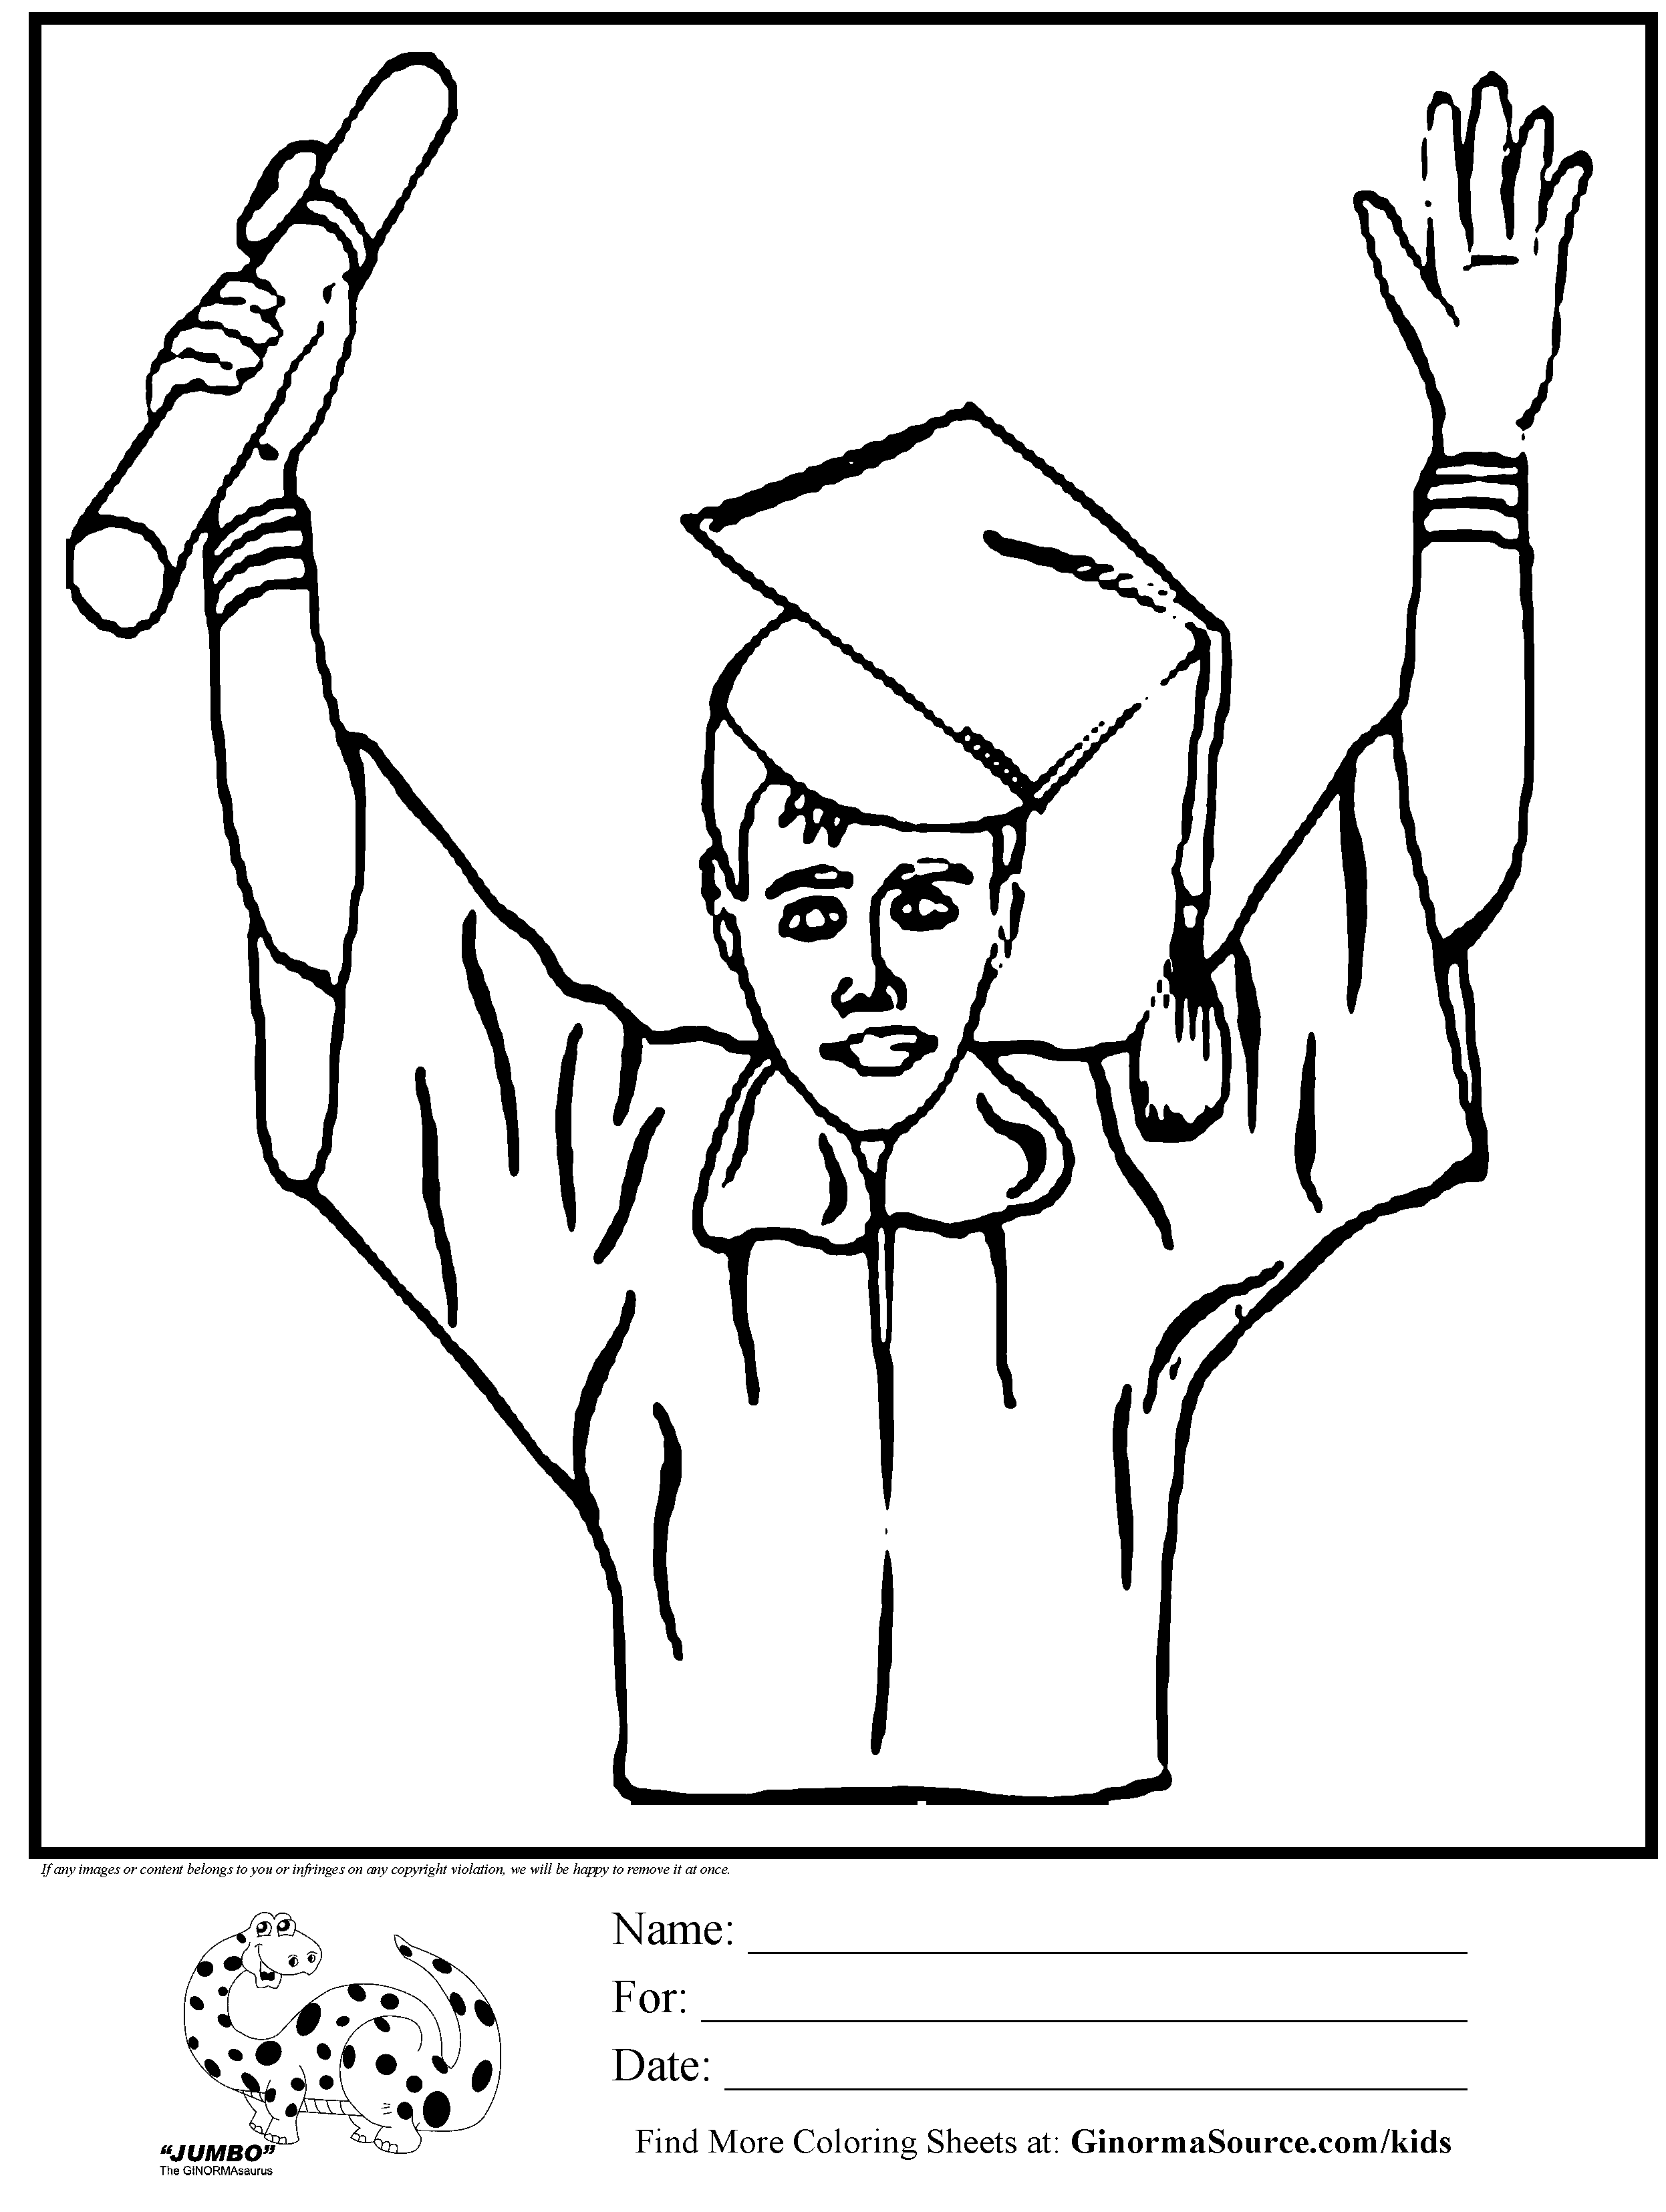 14 Free Pictures for: Graduation Coloring Pages. Temoon.us